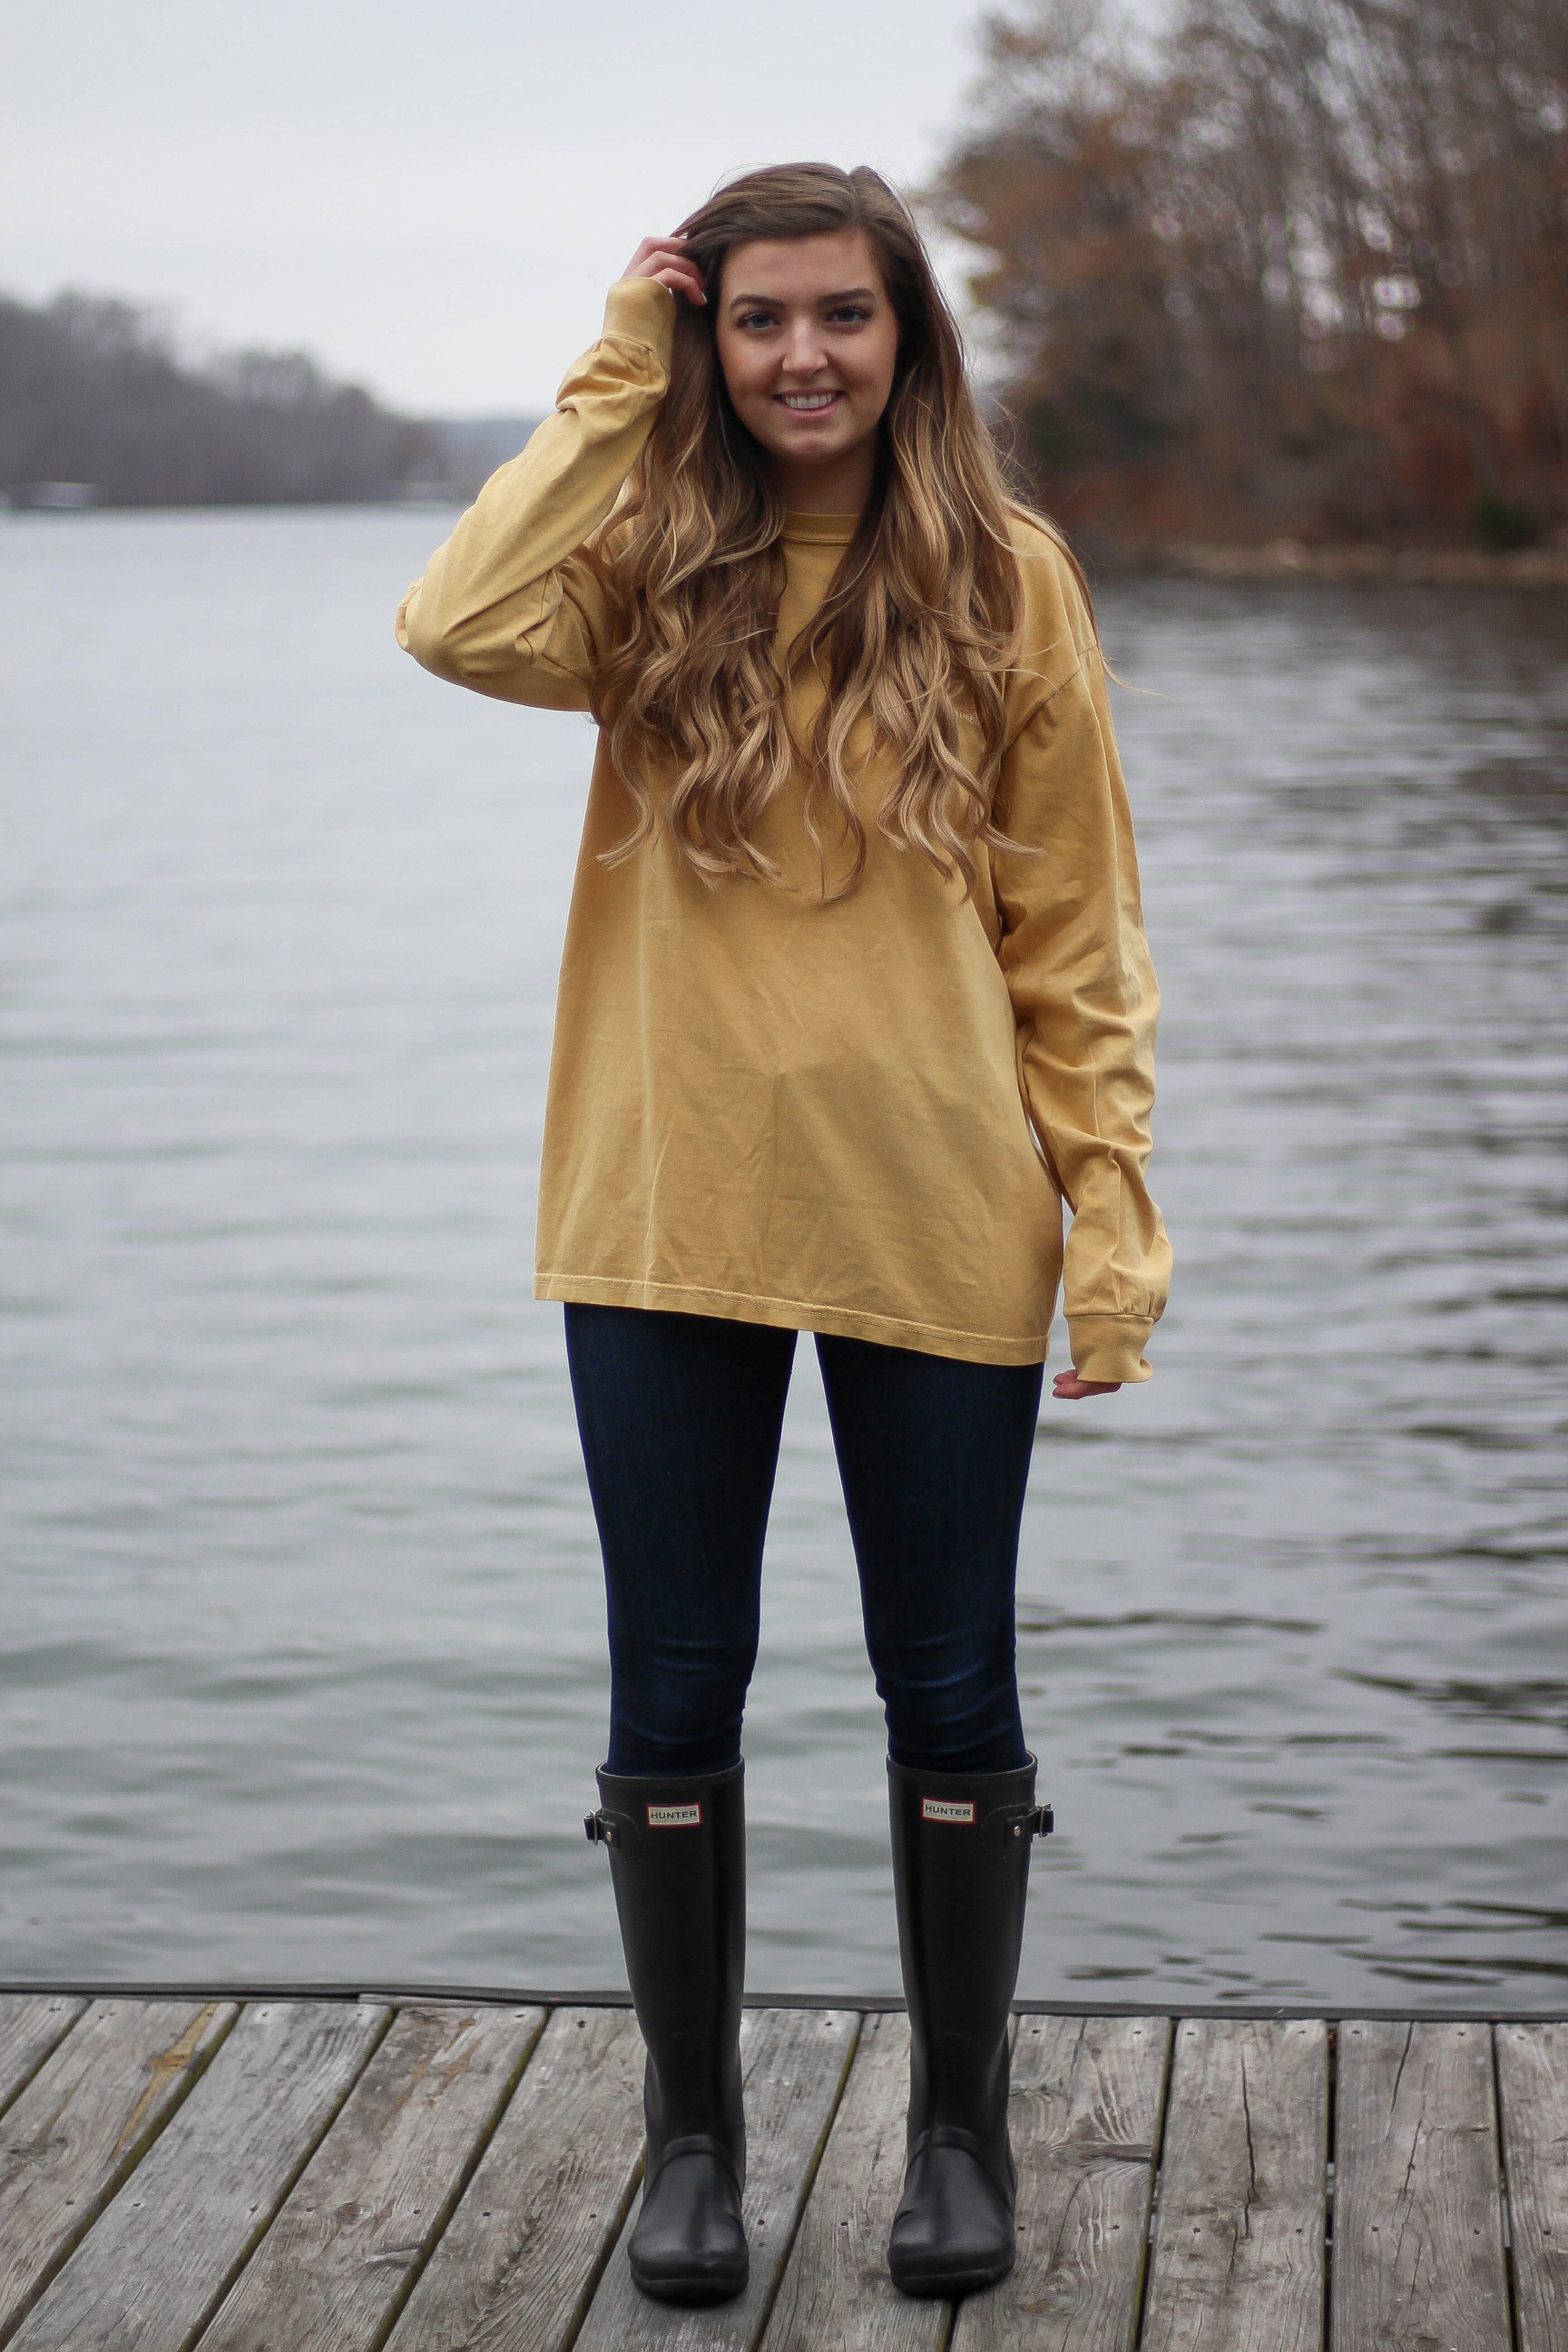 Perfect fall outfit including a Barbour coat, United tee fall t-shirt, and black hunter boots. If you want to know how to style hunter boots this is it! Check it out on my fashion blog daily dose of charm by Lauren Lindmark dailydoseofcharm.com